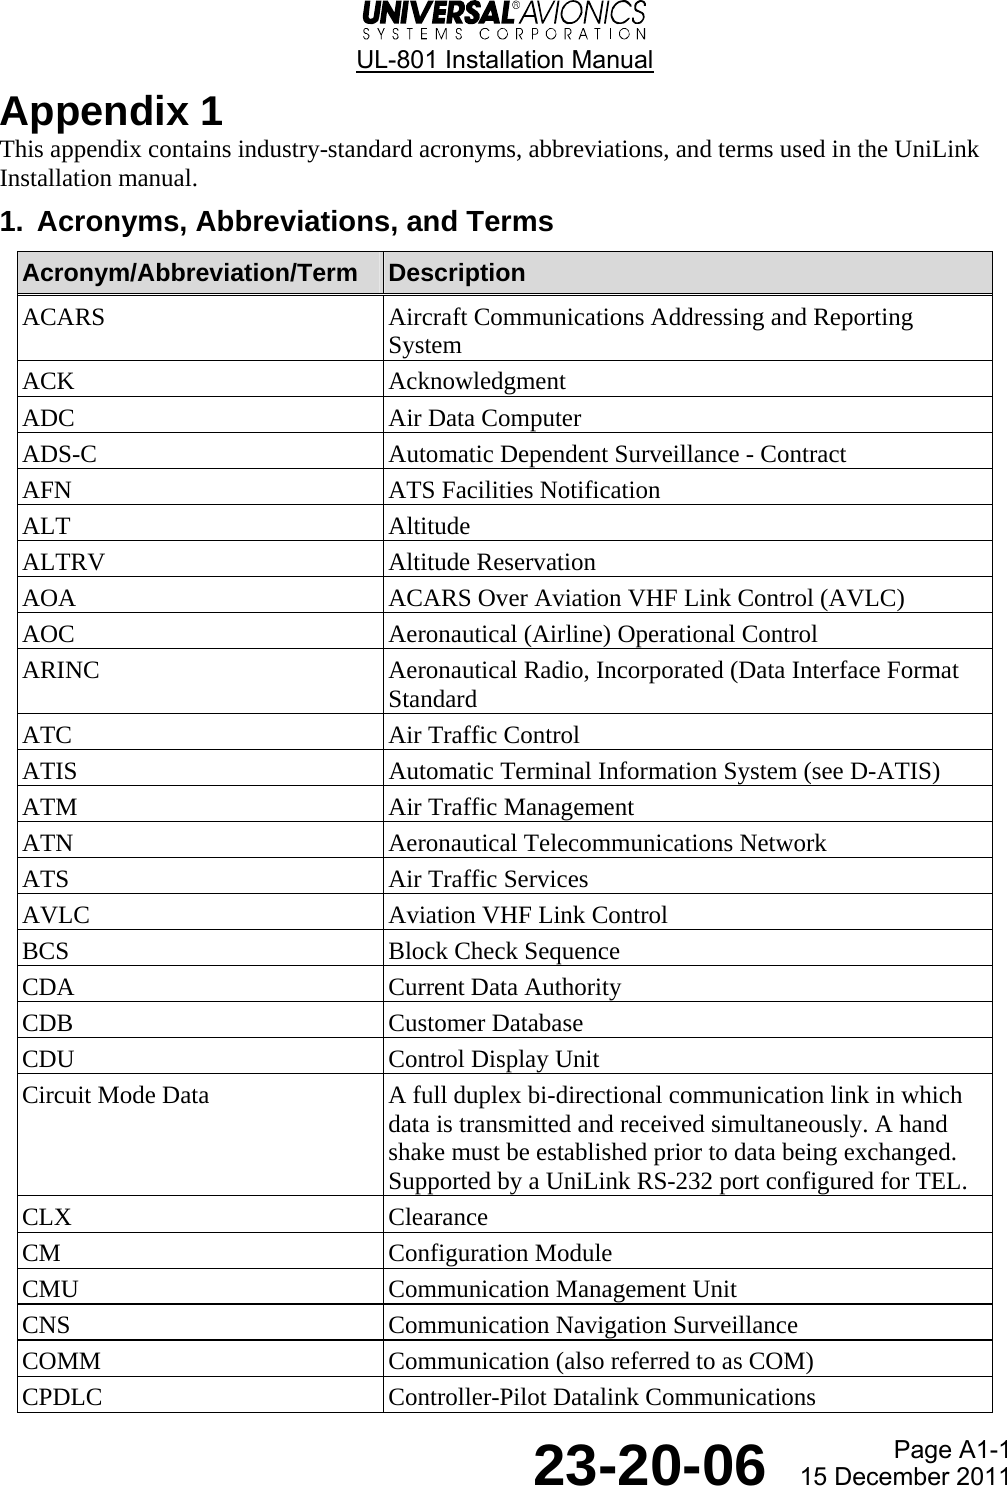  UL-801 Installation Manual  Page A1-1  23-20-06  15 December 2011 Appendix 1 This appendix contains industry-standard acronyms, abbreviations, and terms used in the UniLink Installation manual. 1.  Acronyms, Abbreviations, and Terms Acronym/Abbreviation/Term  Description ACARS Aircraft Communications Addressing and Reporting System ACK Acknowledgment ADC  Air Data Computer ADS-C Automatic Dependent Surveillance - Contract AFN  ATS Facilities Notification ALT Altitude ALTRV Altitude Reservation AOA  ACARS Over Aviation VHF Link Control (AVLC) AOC Aeronautical (Airline) Operational Control ARINC  Aeronautical Radio, Incorporated (Data Interface Format Standard ATC  Air Traffic Control ATIS  Automatic Terminal Information System (see D-ATIS) ATM  Air Traffic Management ATN Aeronautical Telecommunications Network ATS  Air Traffic Services AVLC  Aviation VHF Link Control BCS  Block Check Sequence CDA  Current Data Authority CDB Customer Database CDU  Control Display Unit Circuit Mode Data  A full duplex bi-directional communication link in which data is transmitted and received simultaneously. A hand shake must be established prior to data being exchanged. Supported by a UniLink RS-232 port configured for TEL. CLX Clearance CM Configuration Module CMU  Communication Management Unit CNS  Communication Navigation Surveillance COMM  Communication (also referred to as COM) CPDLC Controller-Pilot Datalink Communications 